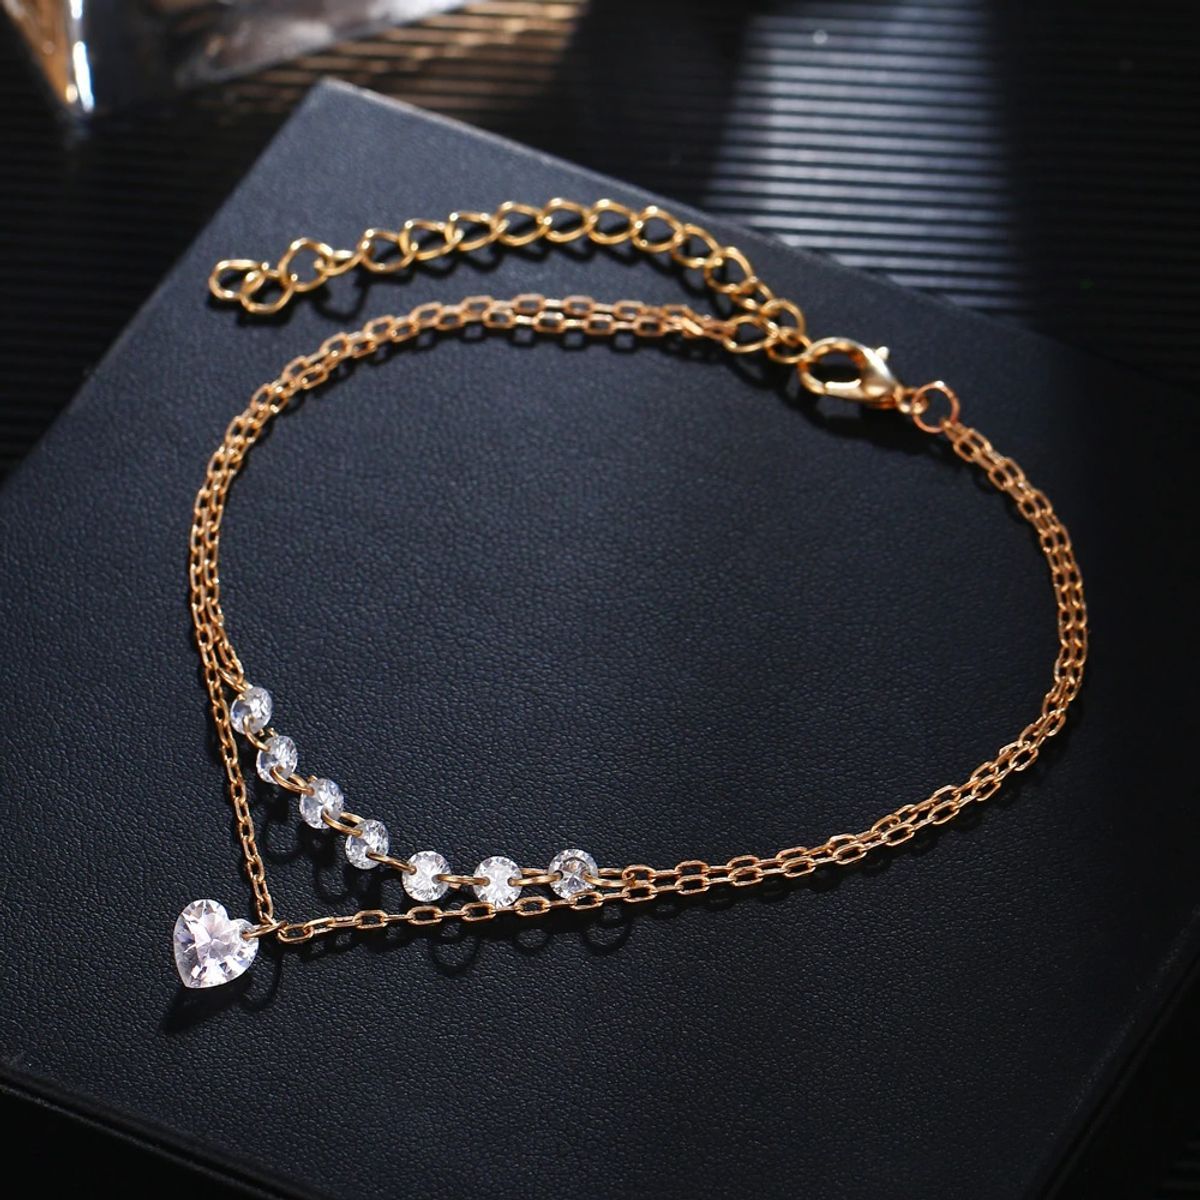 Traditional Beautiful  Lightweighted Inspired Delicate Gold Plated  Adjustable Hand Bracelets Pearls Chain Bracelet With Ring